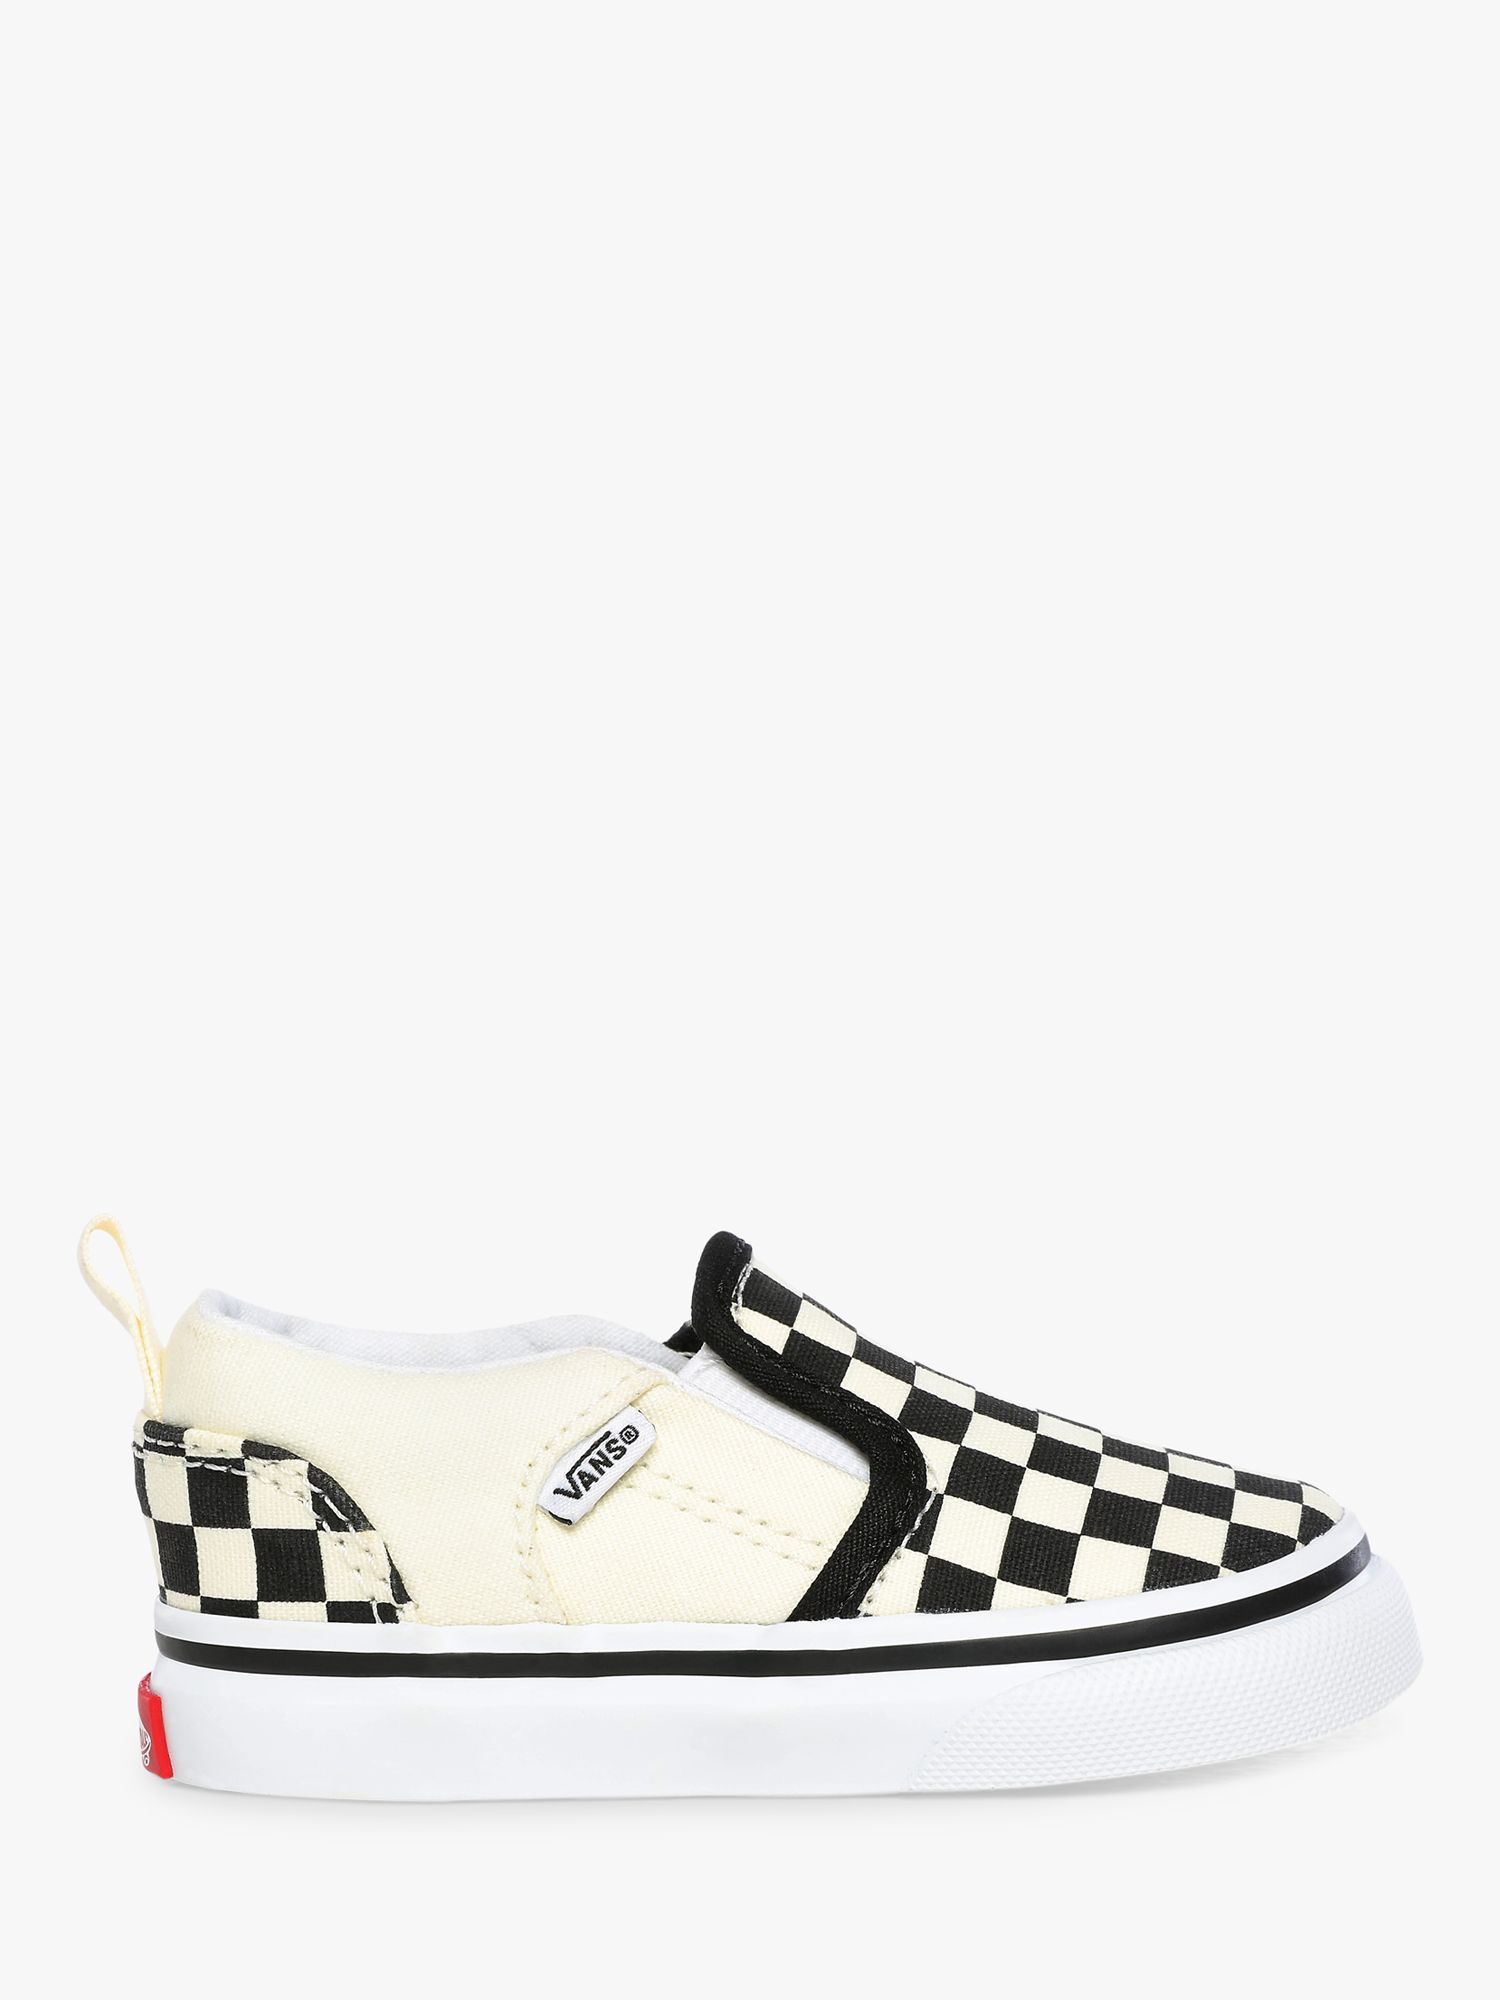 Vans Junior Asher Slip-On Trainers, Checkers Black at John Lewis & Partners